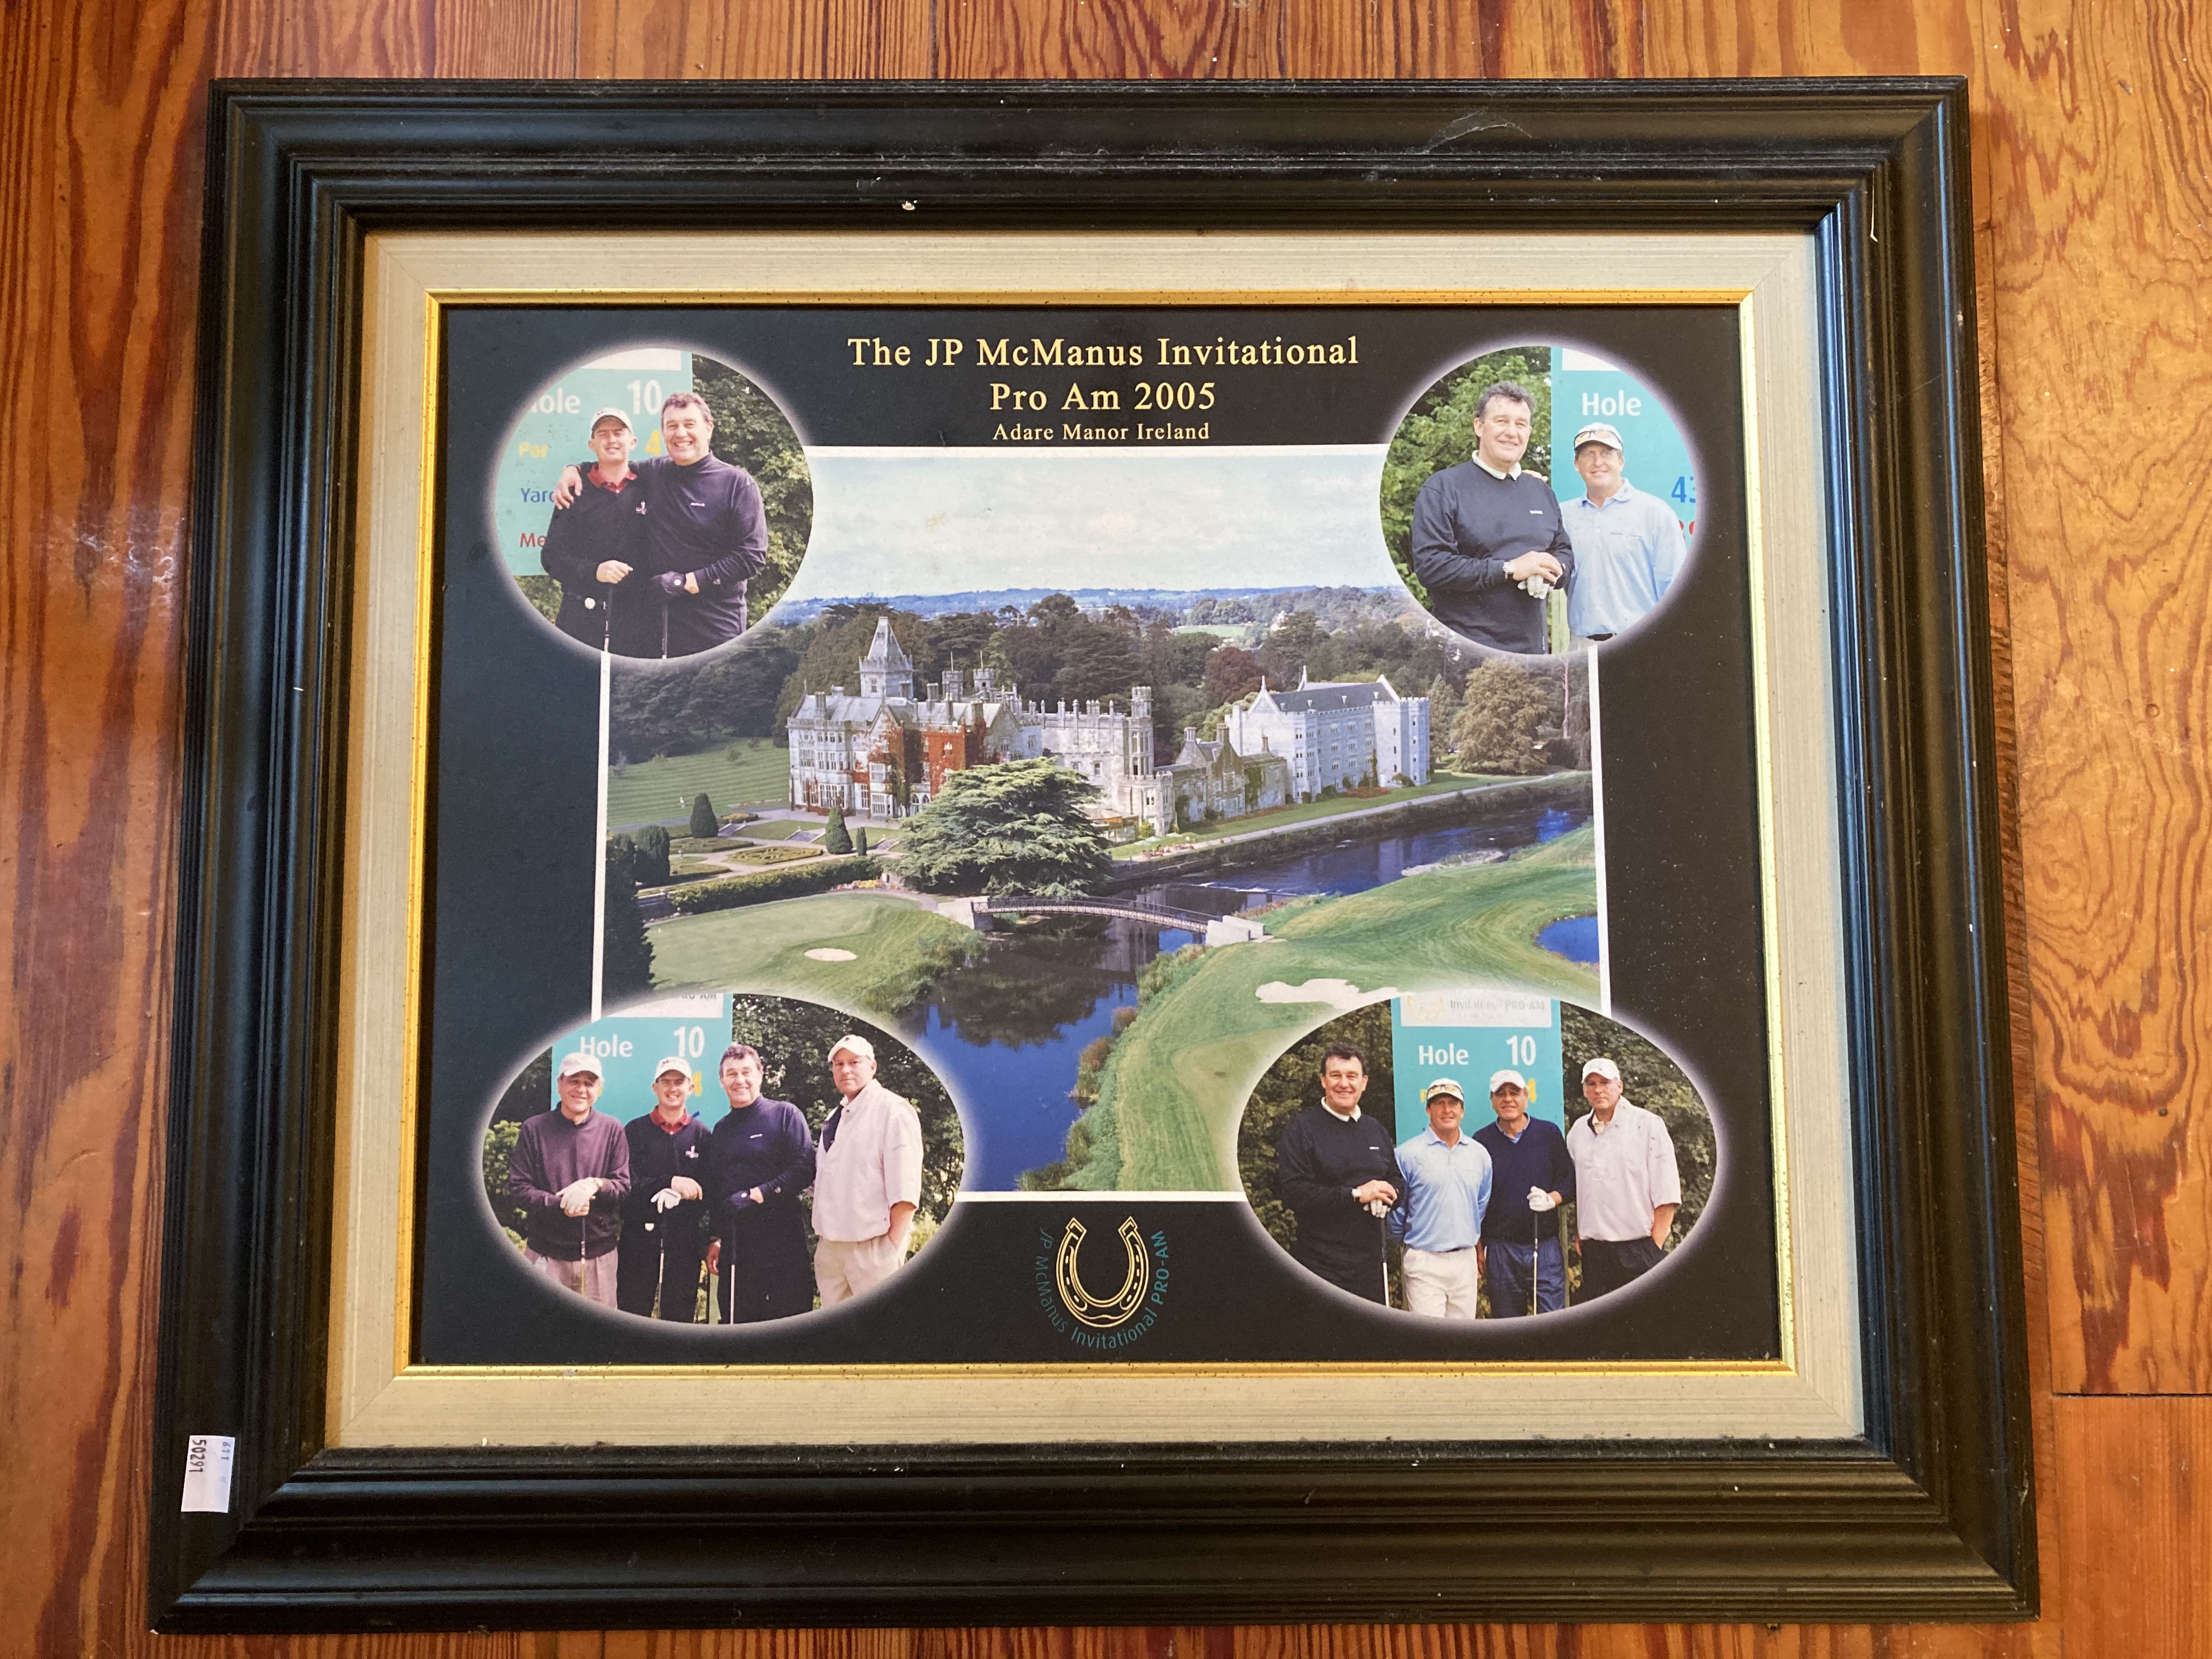 Golf Memorabilia:  A collection of framed Items of various Pro Am and other events, including a - Image 2 of 4